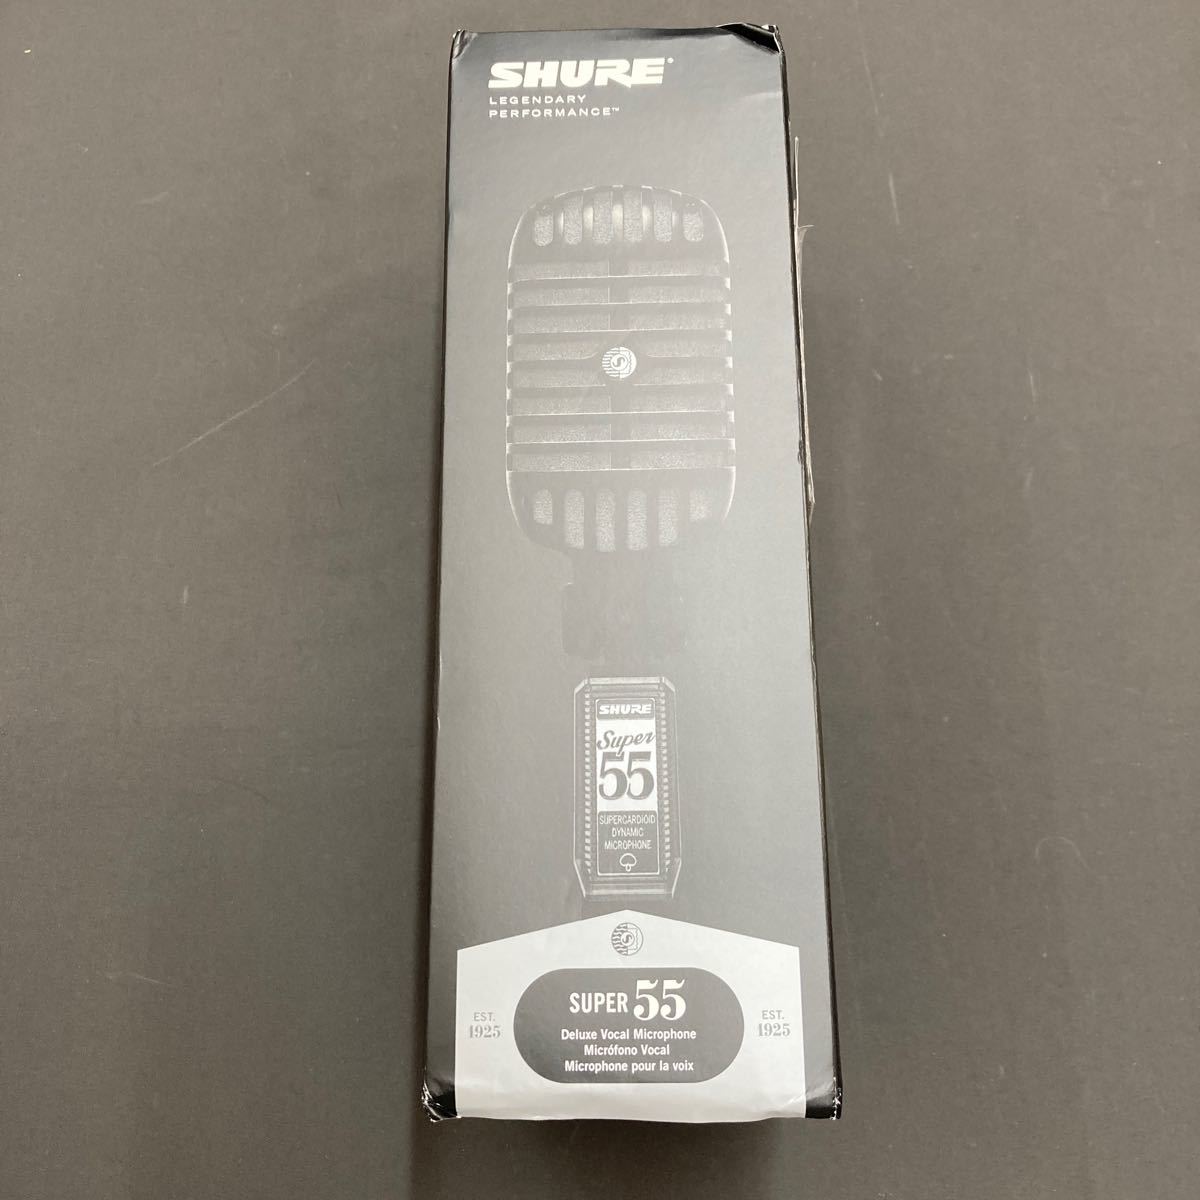 383◆SHURE SUPER 55-BLK LEGENDARY PERFORMANCE MICROPHONE LIMITED EDITION 限定品！ガイコツマイク_画像7